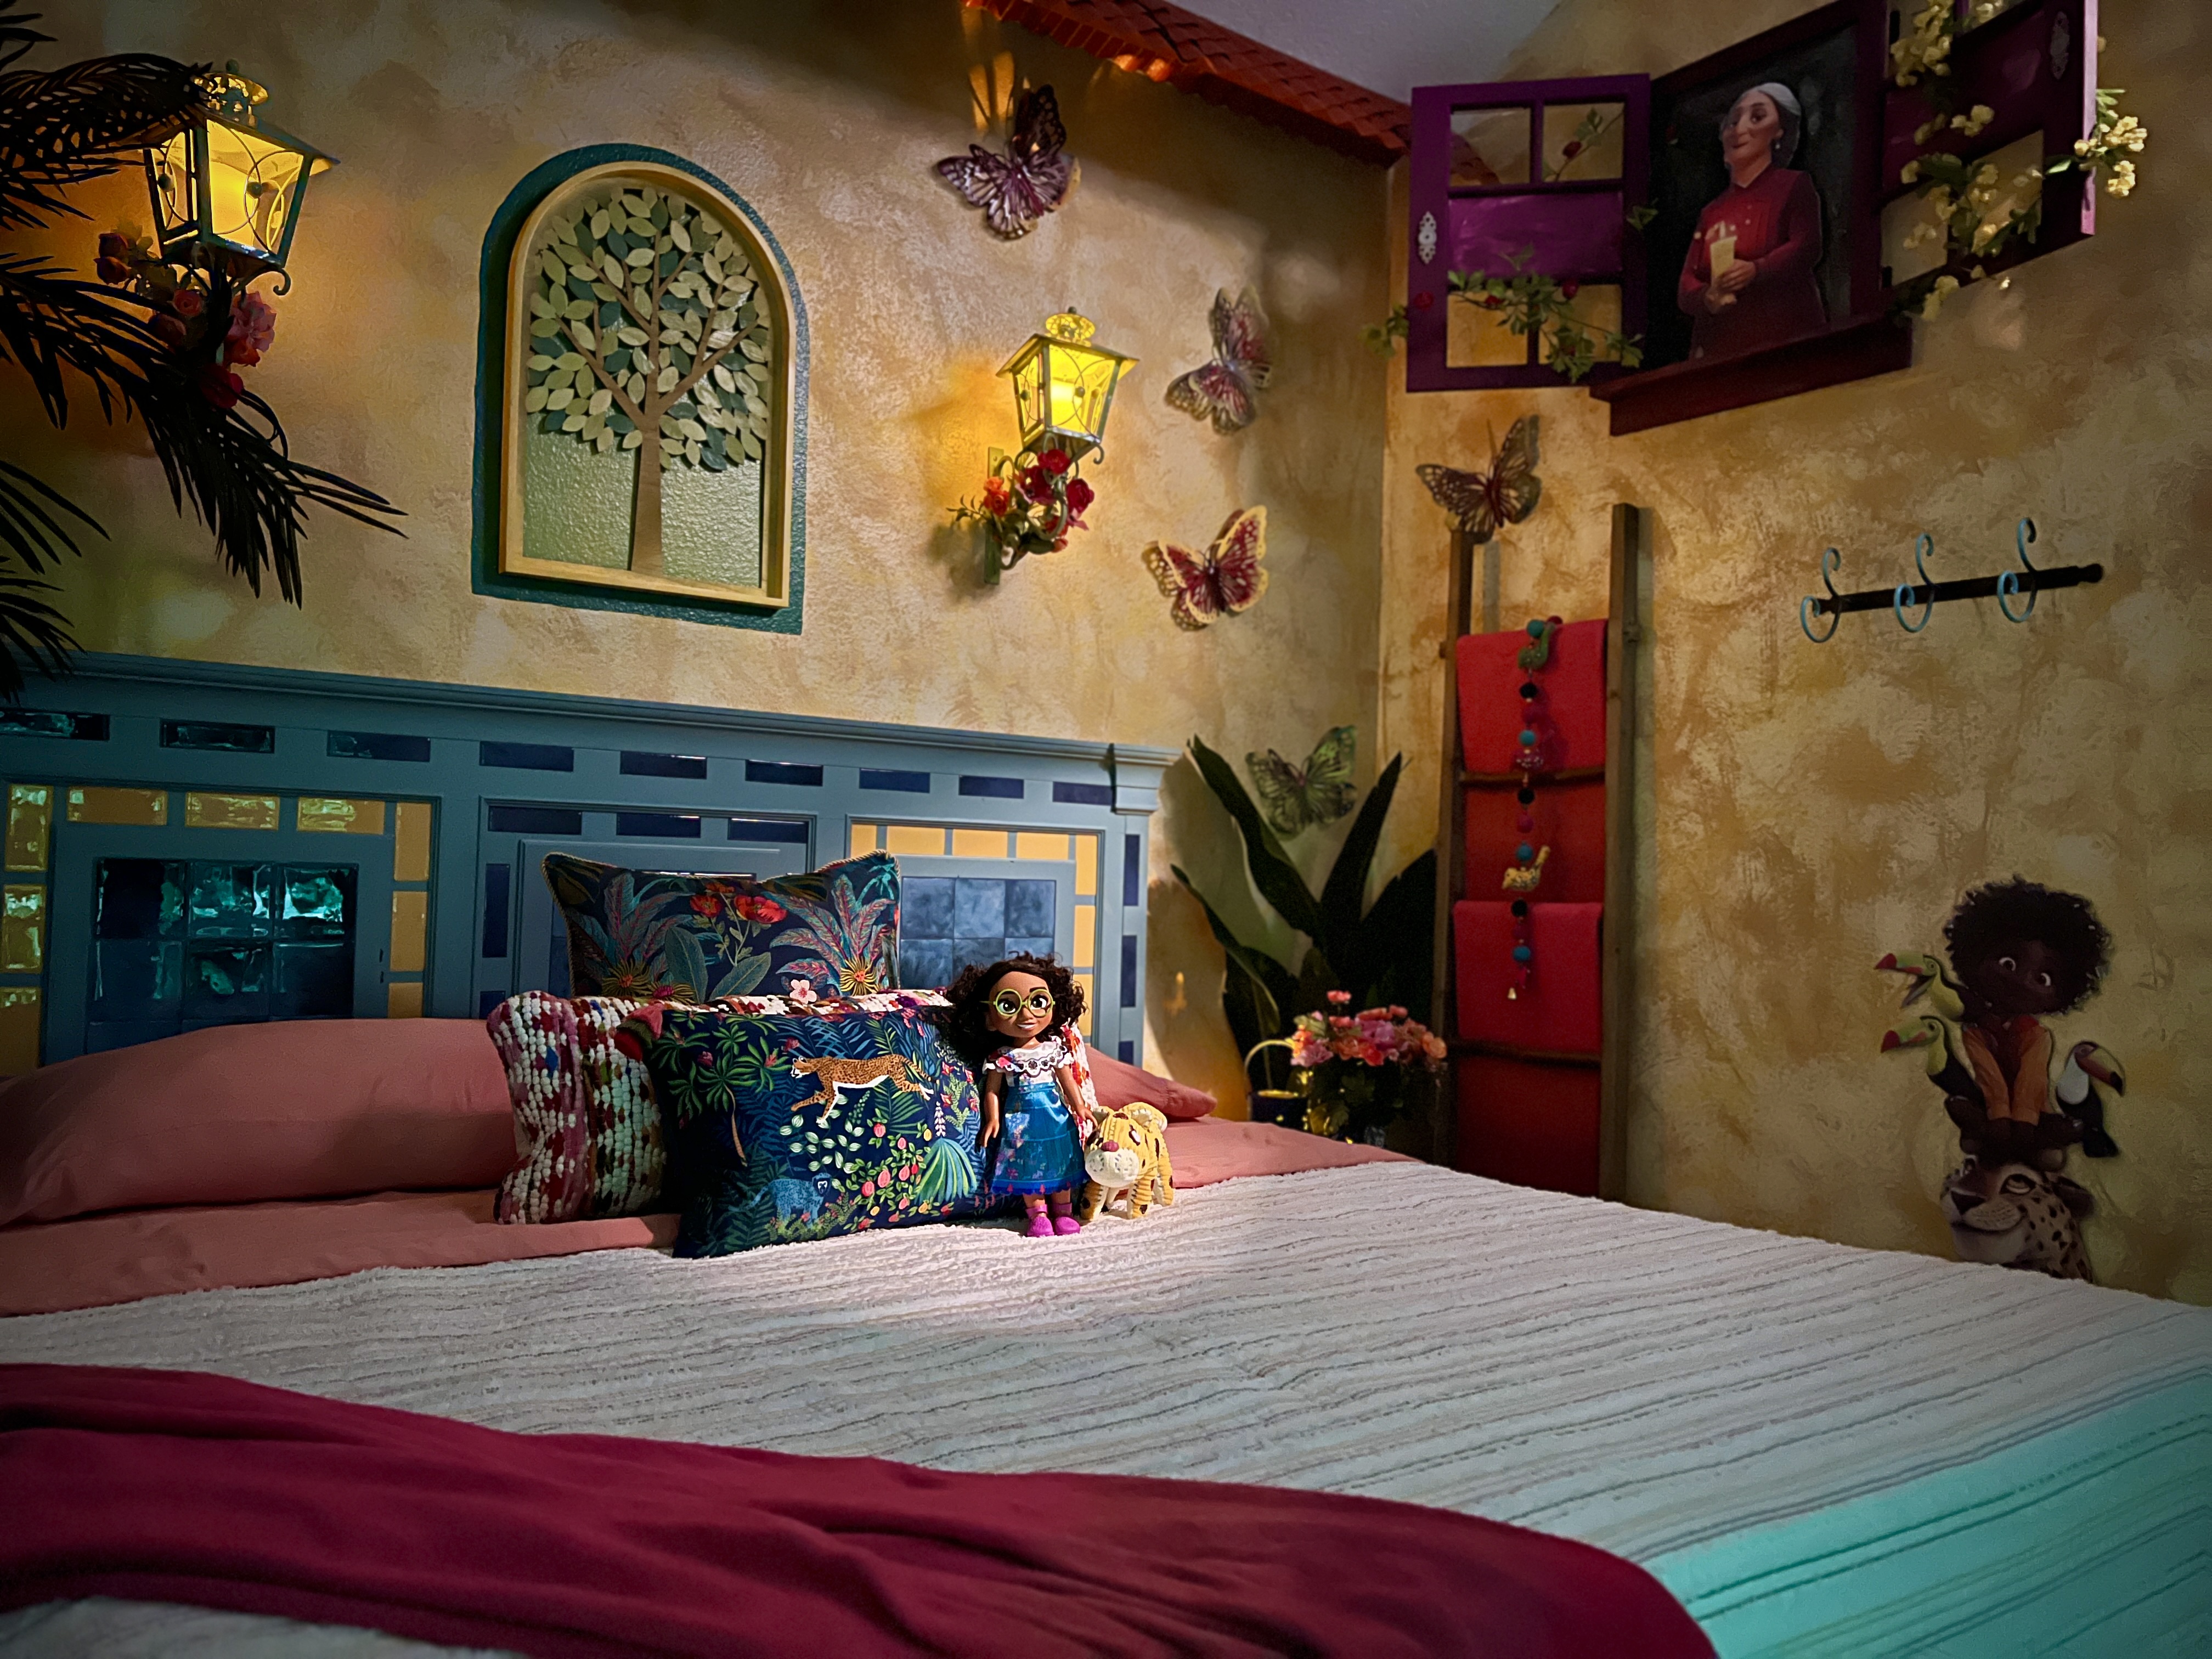 An Encanto awaits, and you can keep the magic burning with "Happily Ever After" in this fun King Bedroom Suite!